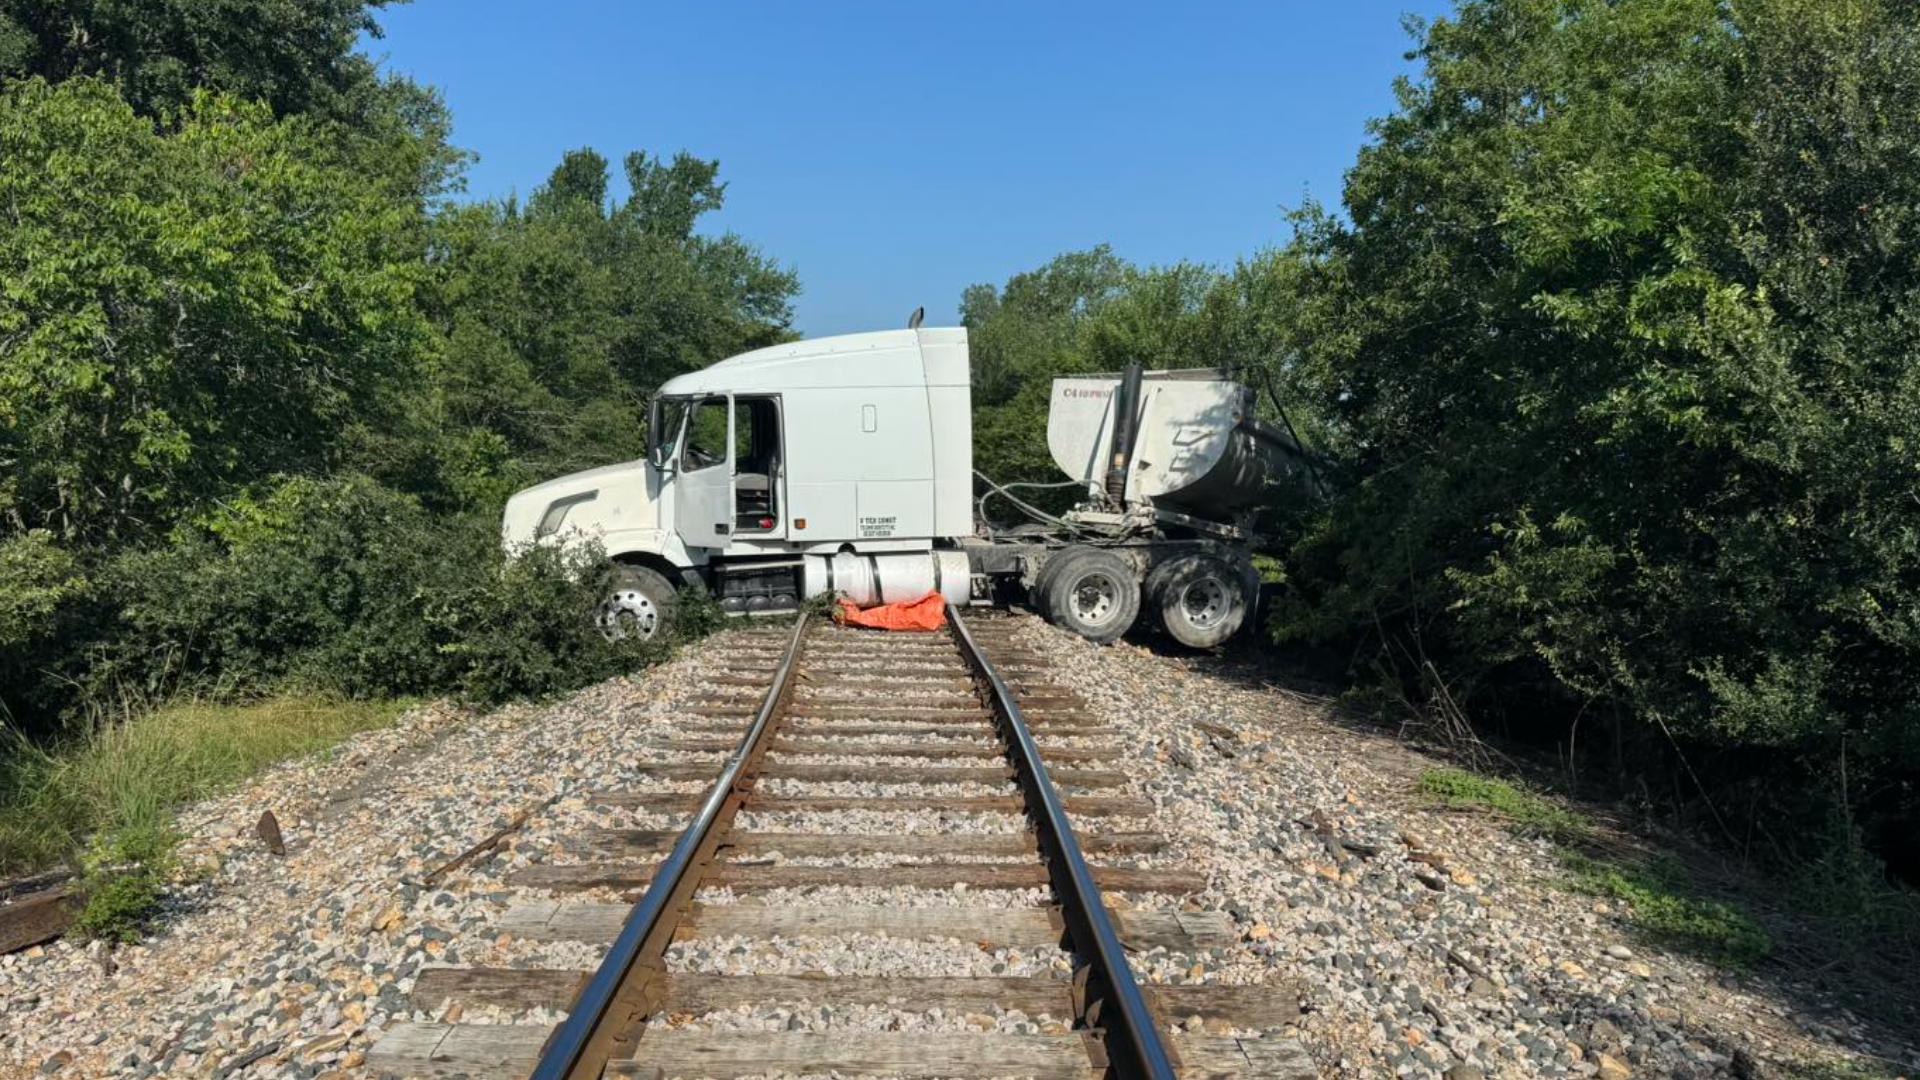 Operations on a train track in Manor are back to normal after an 18-wheeler crashed and ended up on the tracks Friday morning.